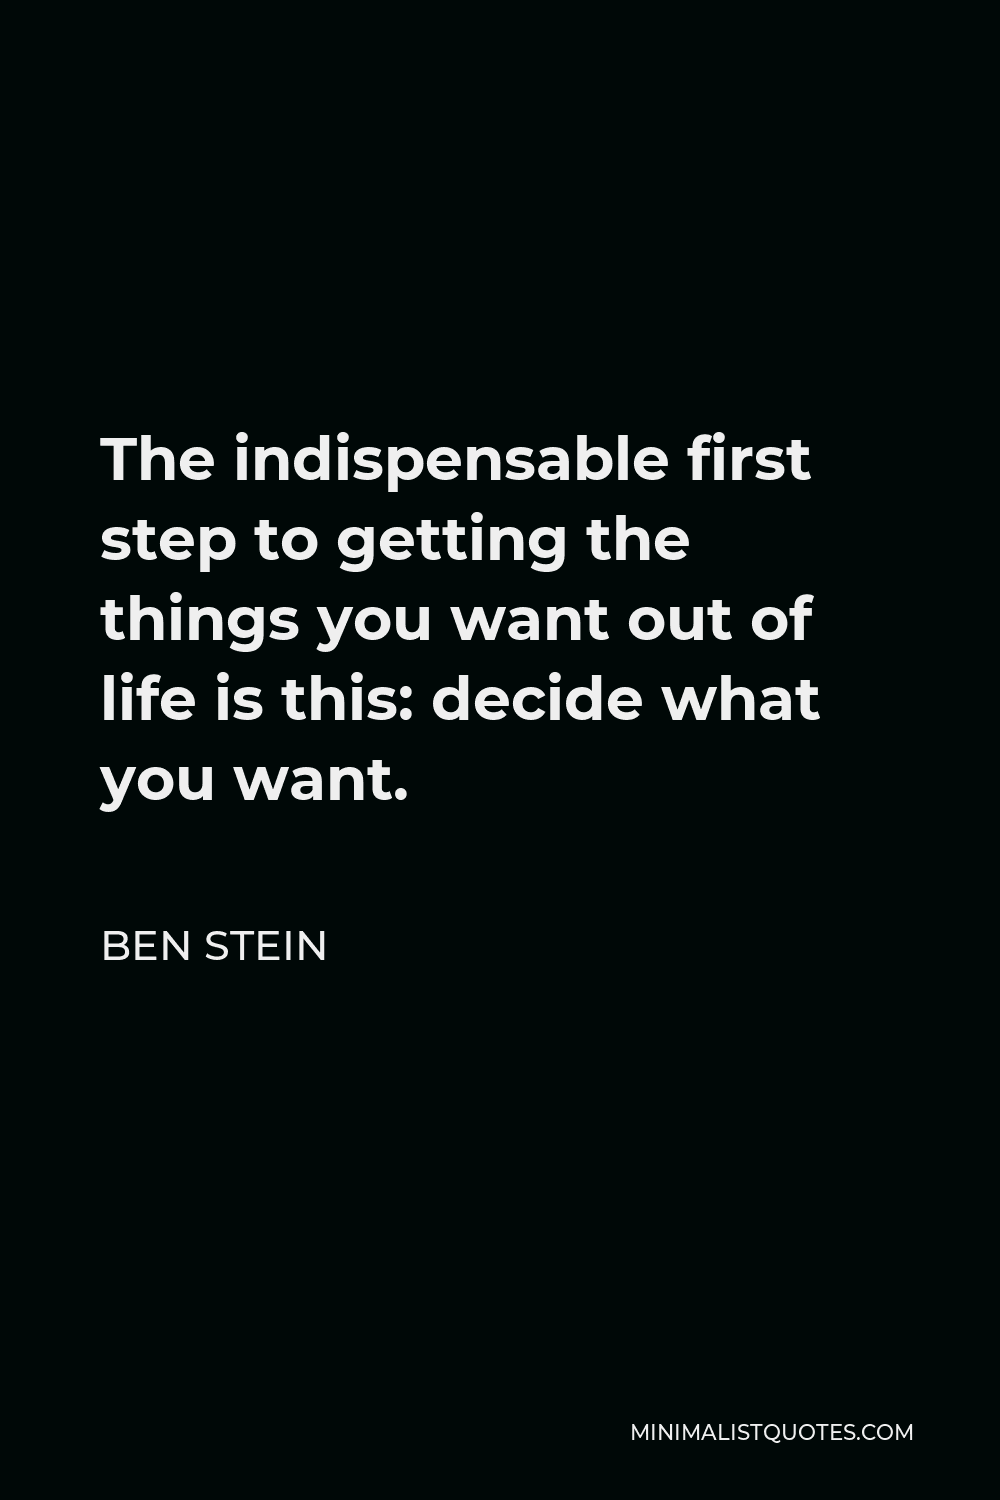 Ben Stein Quote - The indispensable first step to getting the things you want out of life is this: decide what you want.